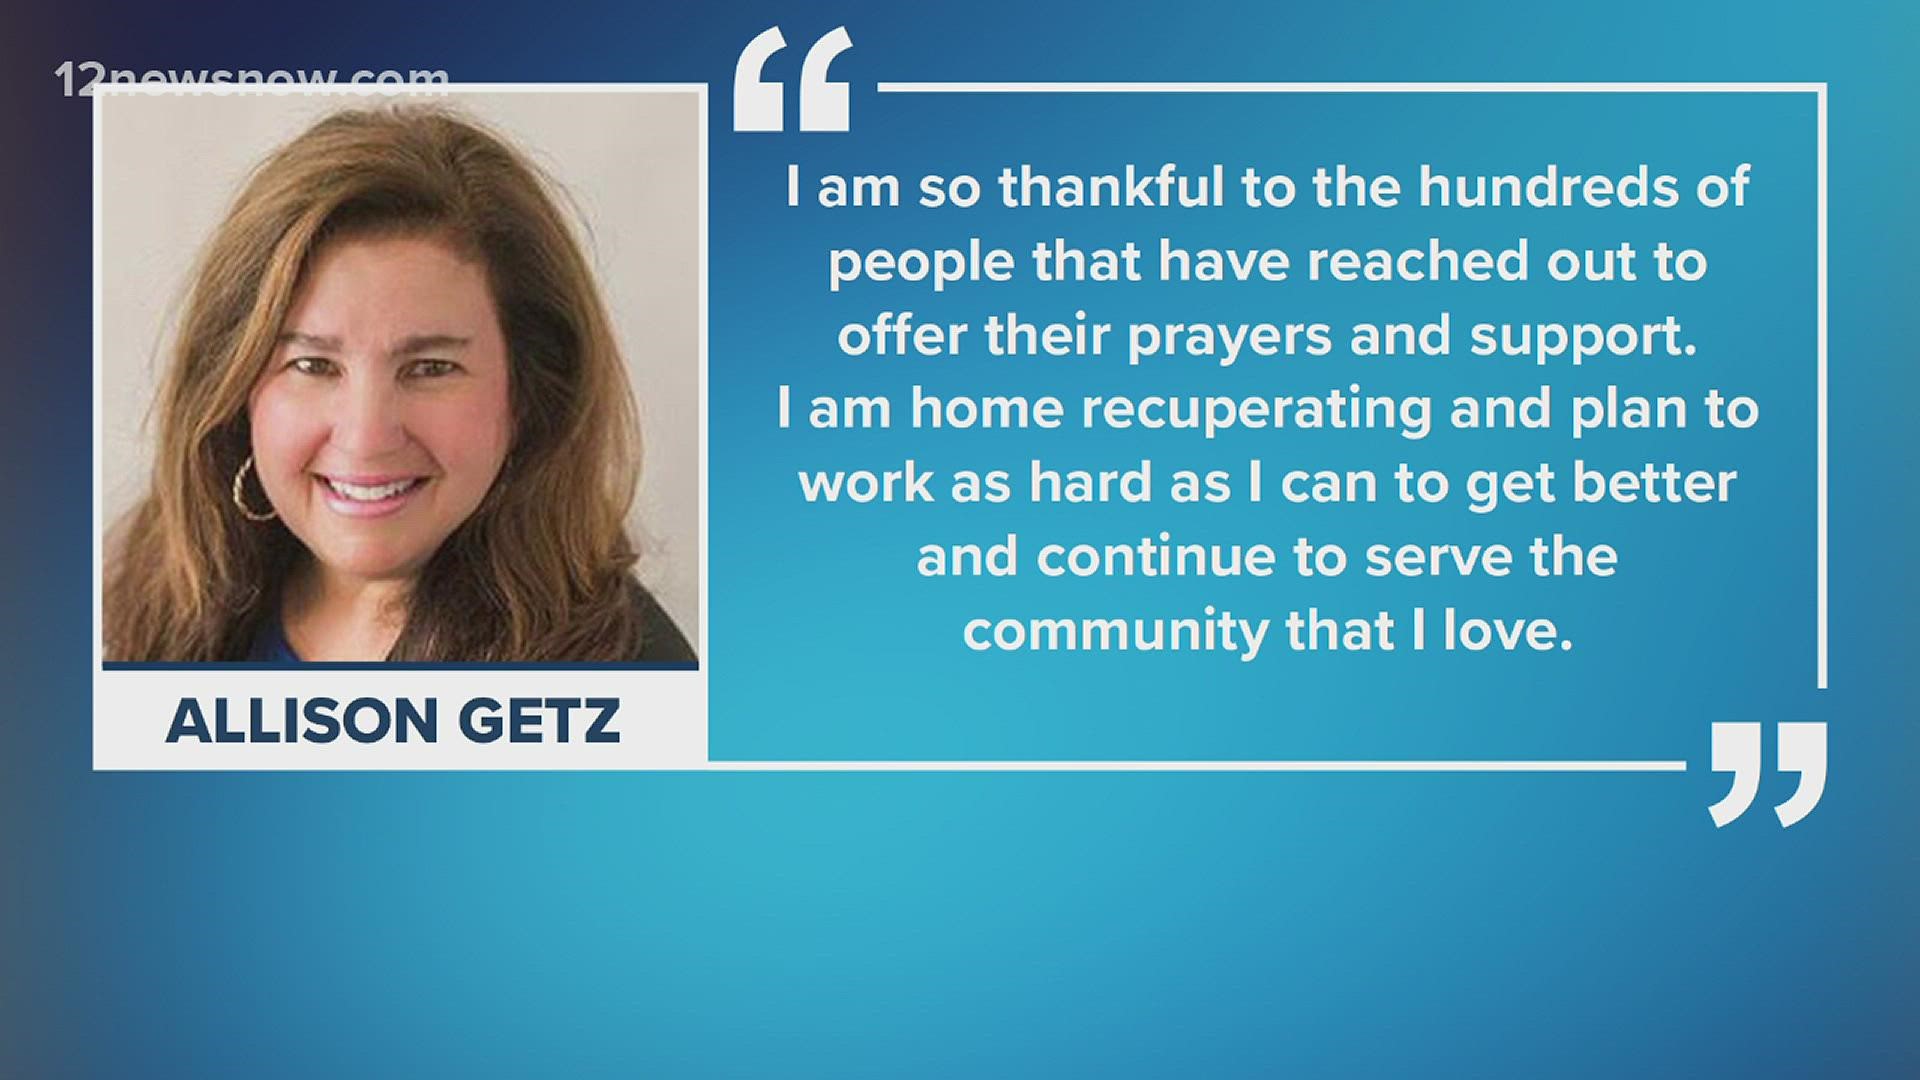 Allison Getz said she is working hard to get better, so she can continue serving the community she loves.